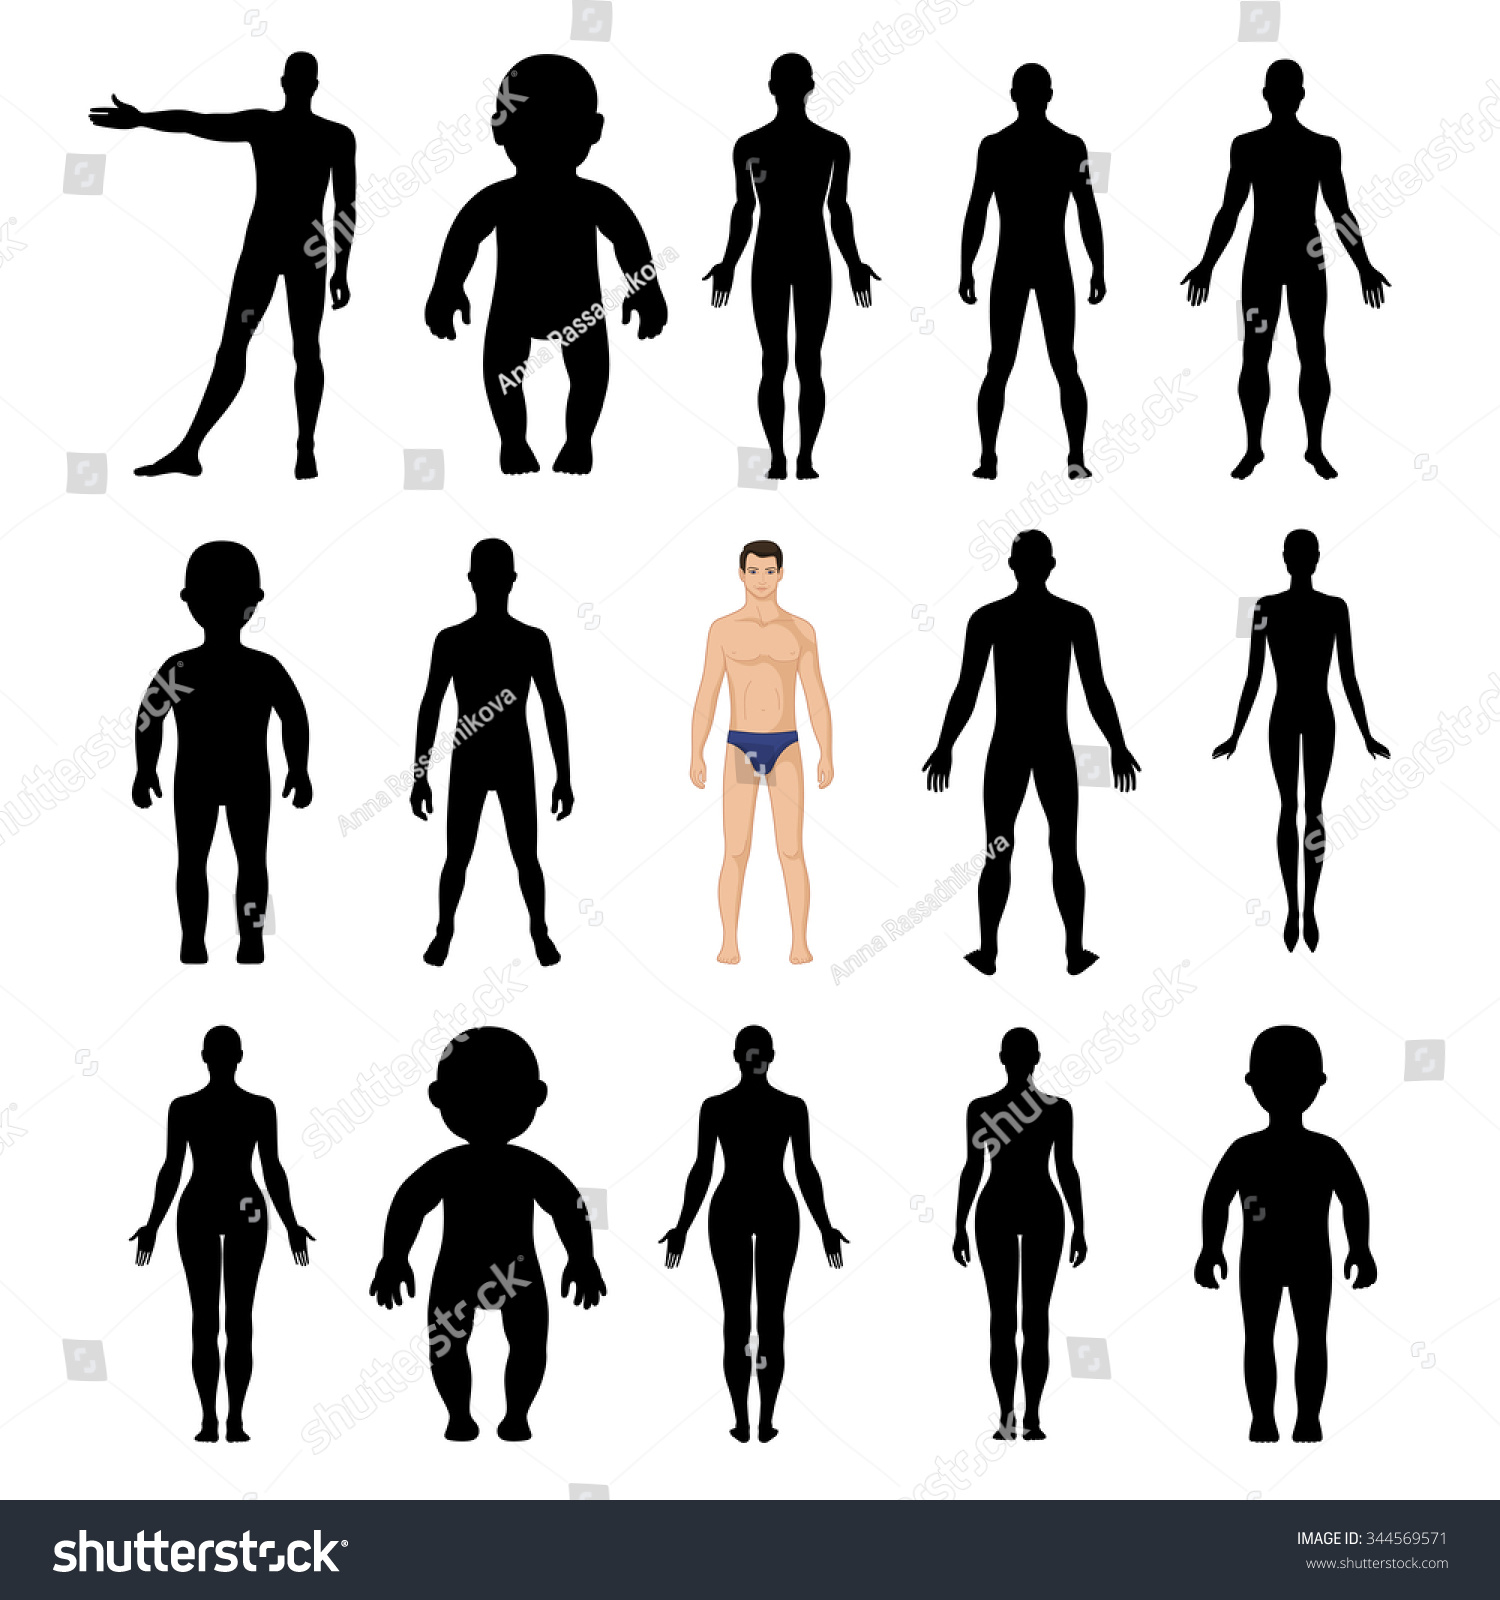 Human Silhouettes Template Figure Front Back Stock Vector 344569571 ...